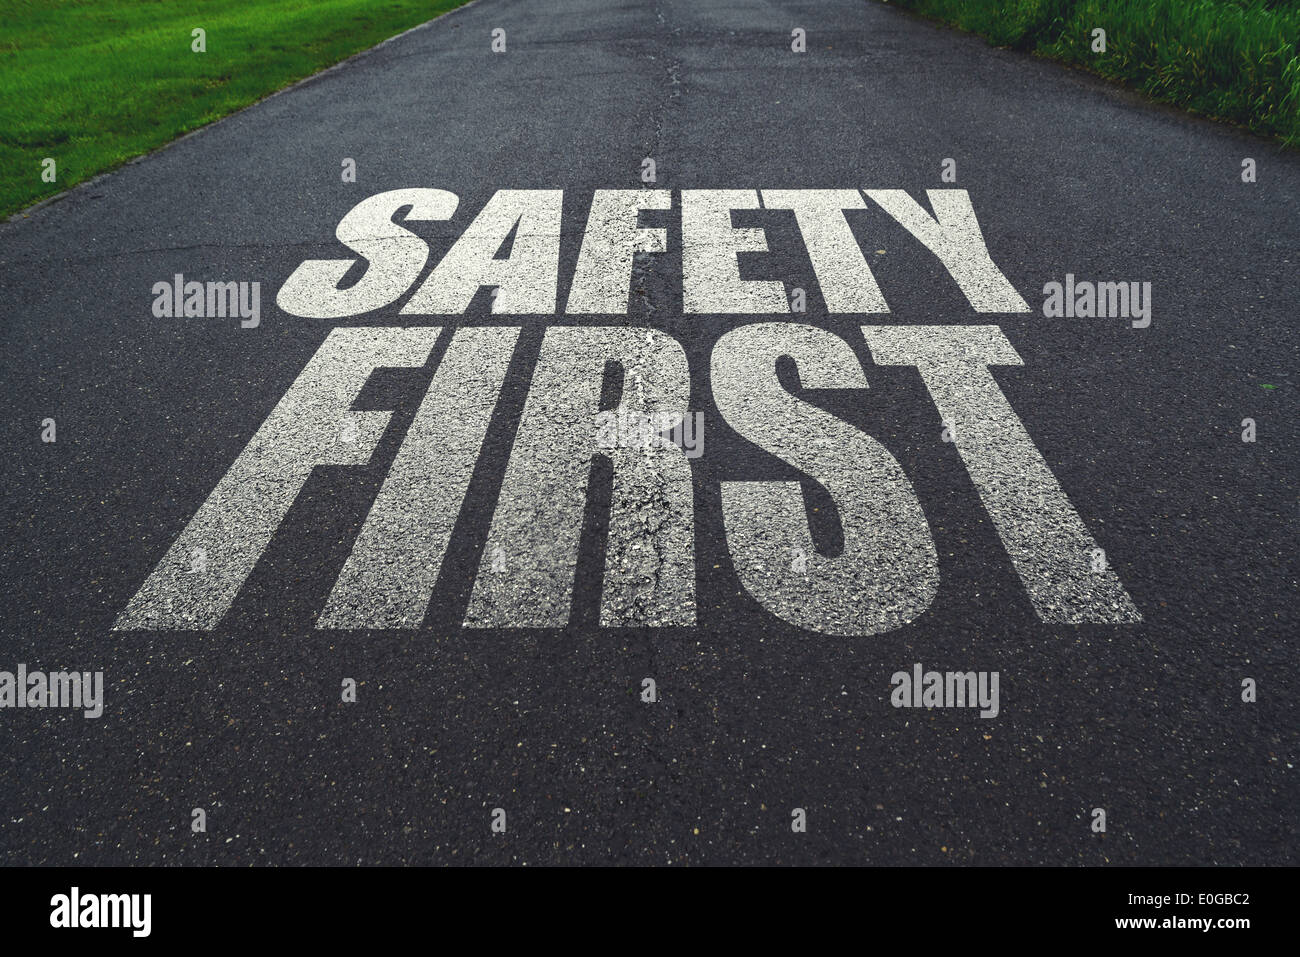 Safety first, message on the road. Concept of safe driving and preventing traffic accident. Stock Photo